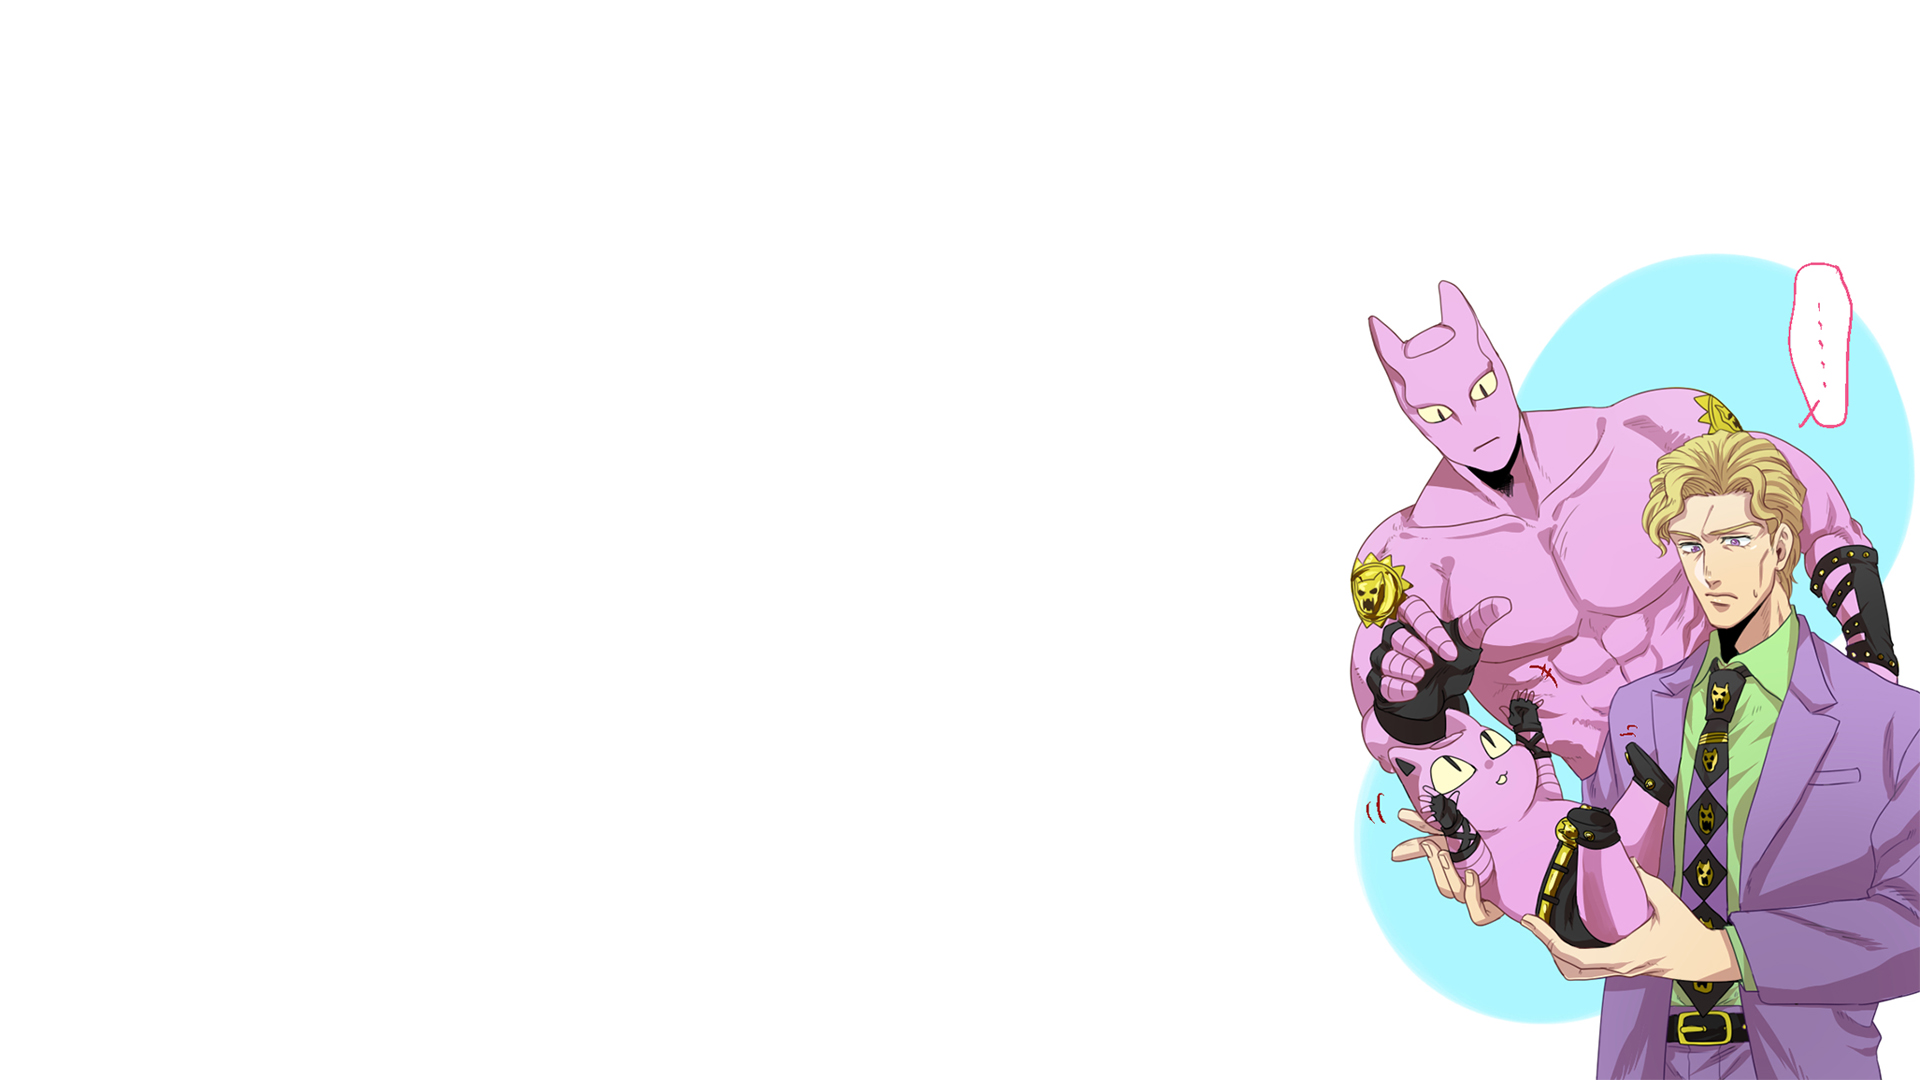 Jojo Killer Queen Yoshikage Kira With Background Of Yellow And White HD  Anime copy Wallpapers  HD Wallpapers  ID 38710